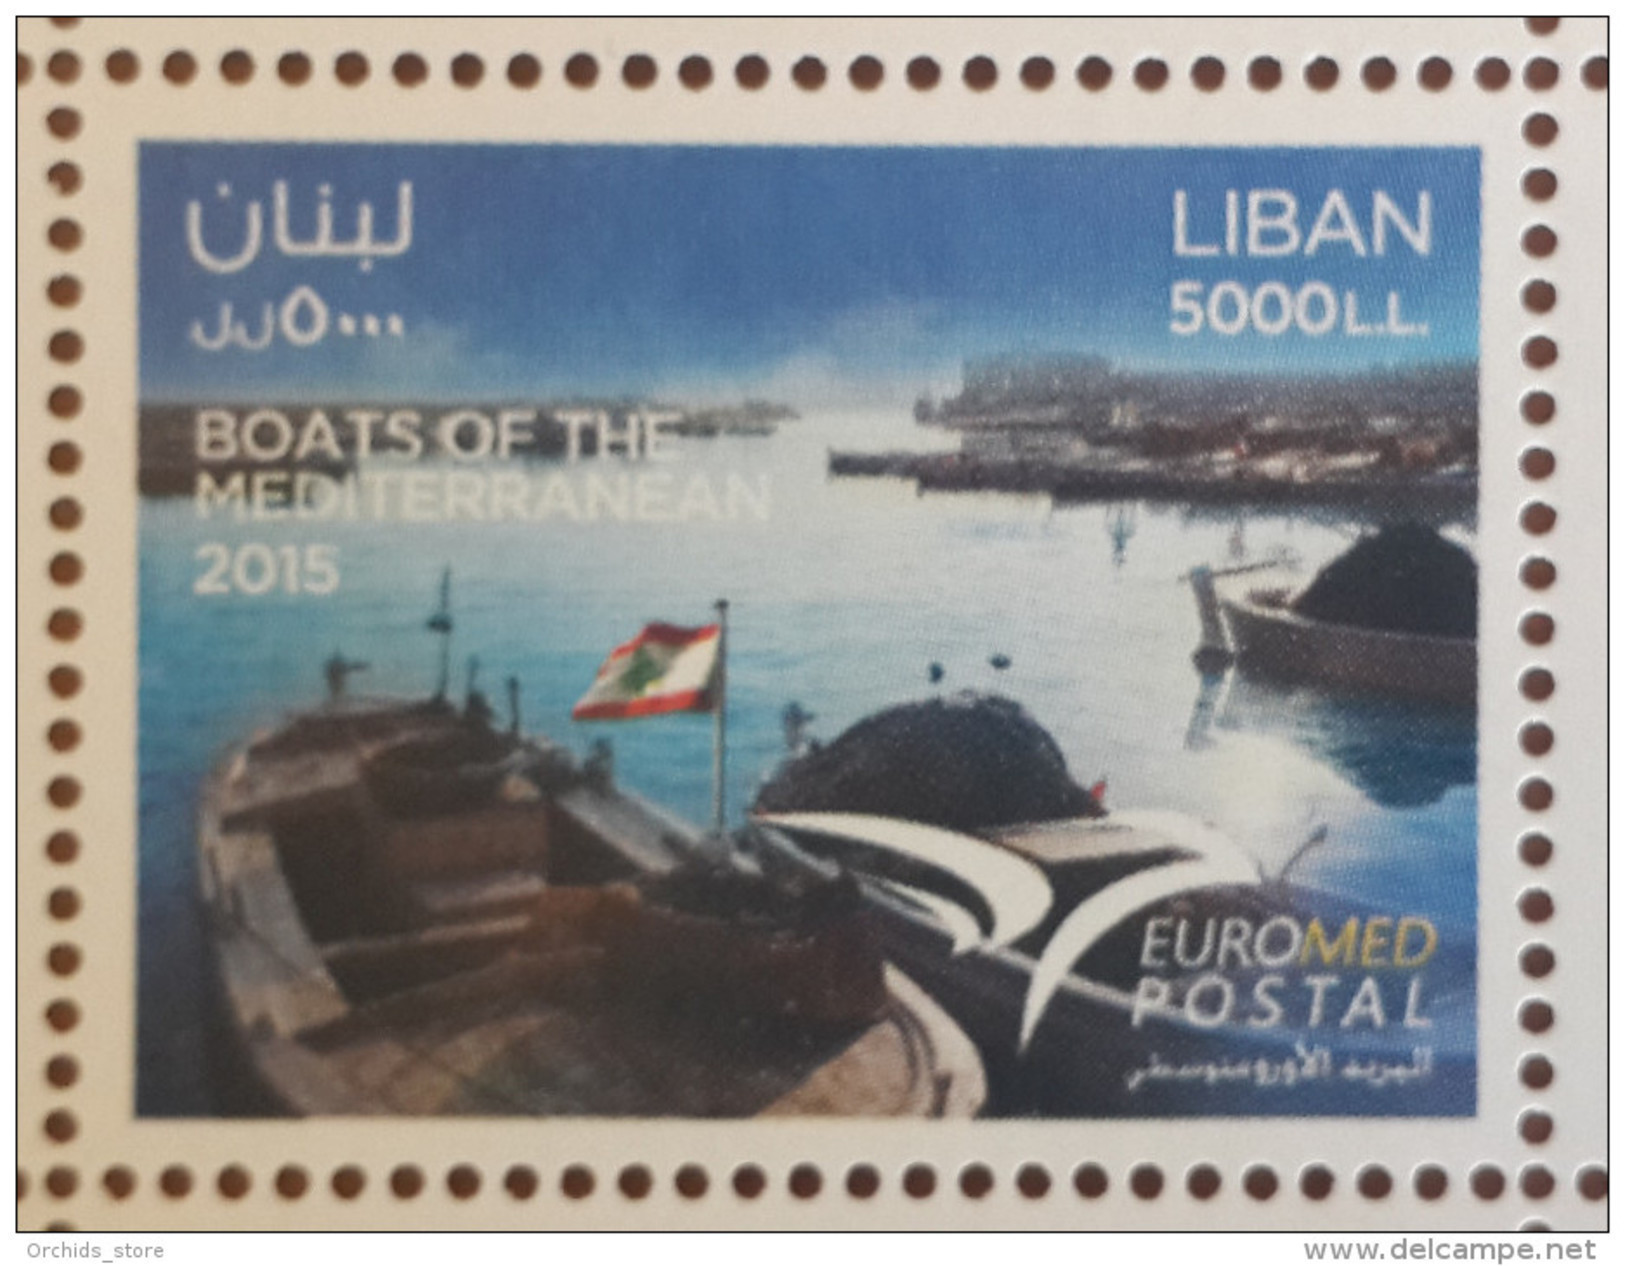 Lebanon 2015 New Stamp MNH - Postal Union For The Mediterrannean - Joint Issue - Euromed - Boats Of The Mediterrannean - Libanon